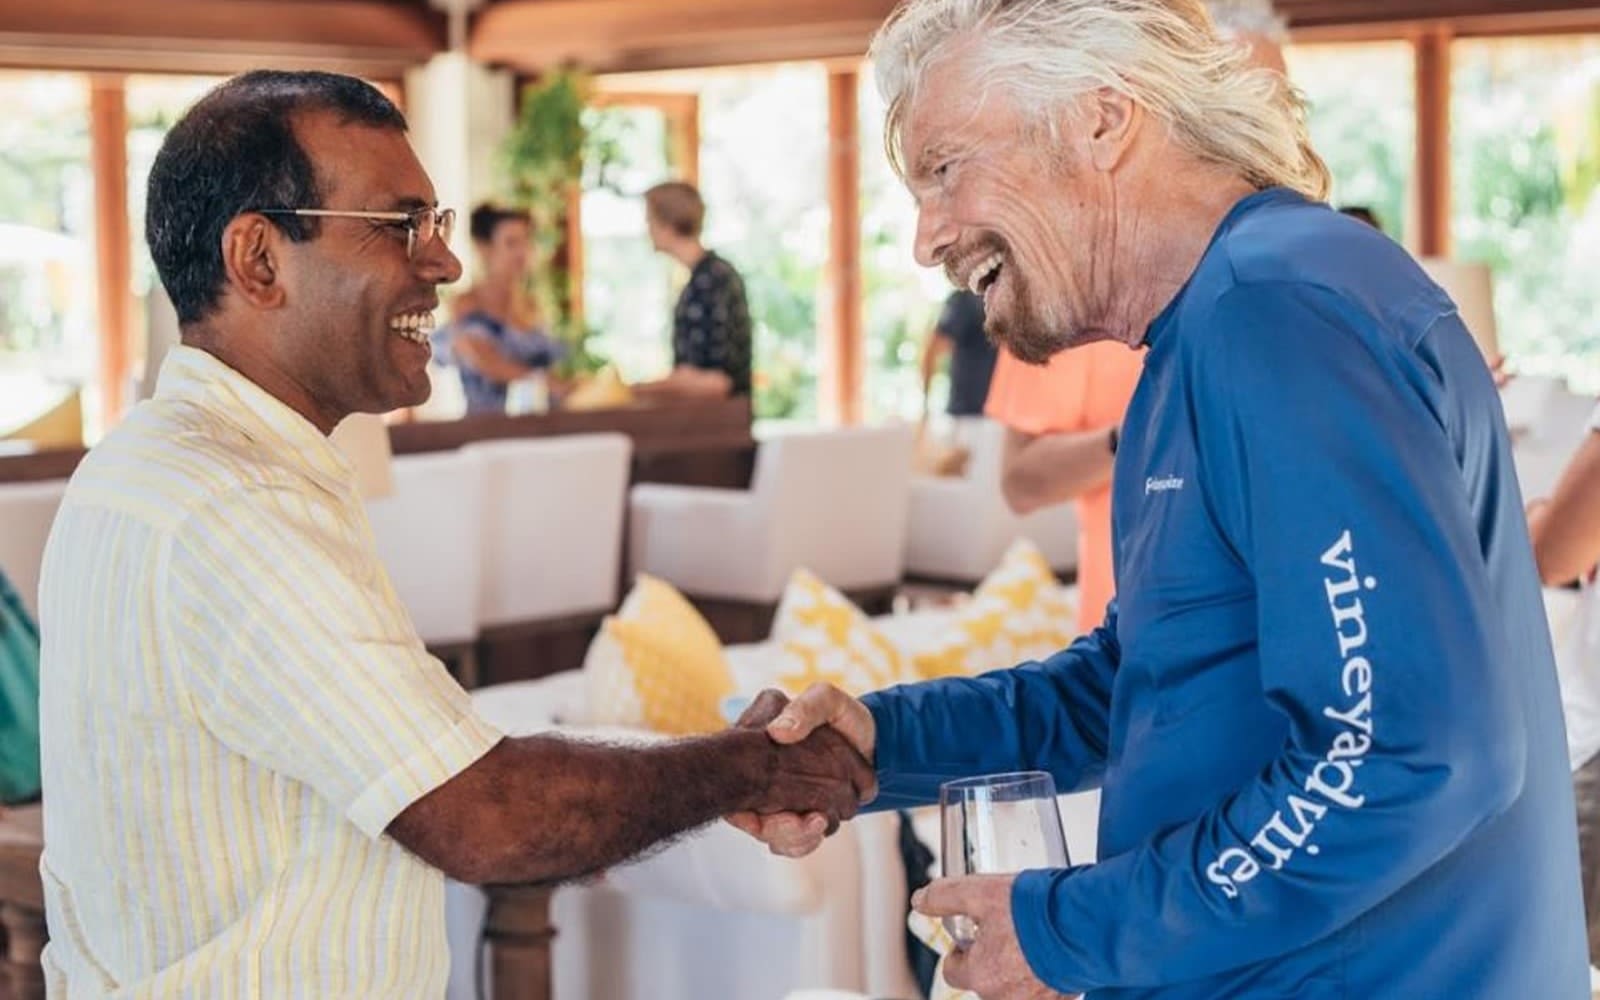 Richard Branson shaking hands with Mohamed Nasheed, smiling at each other